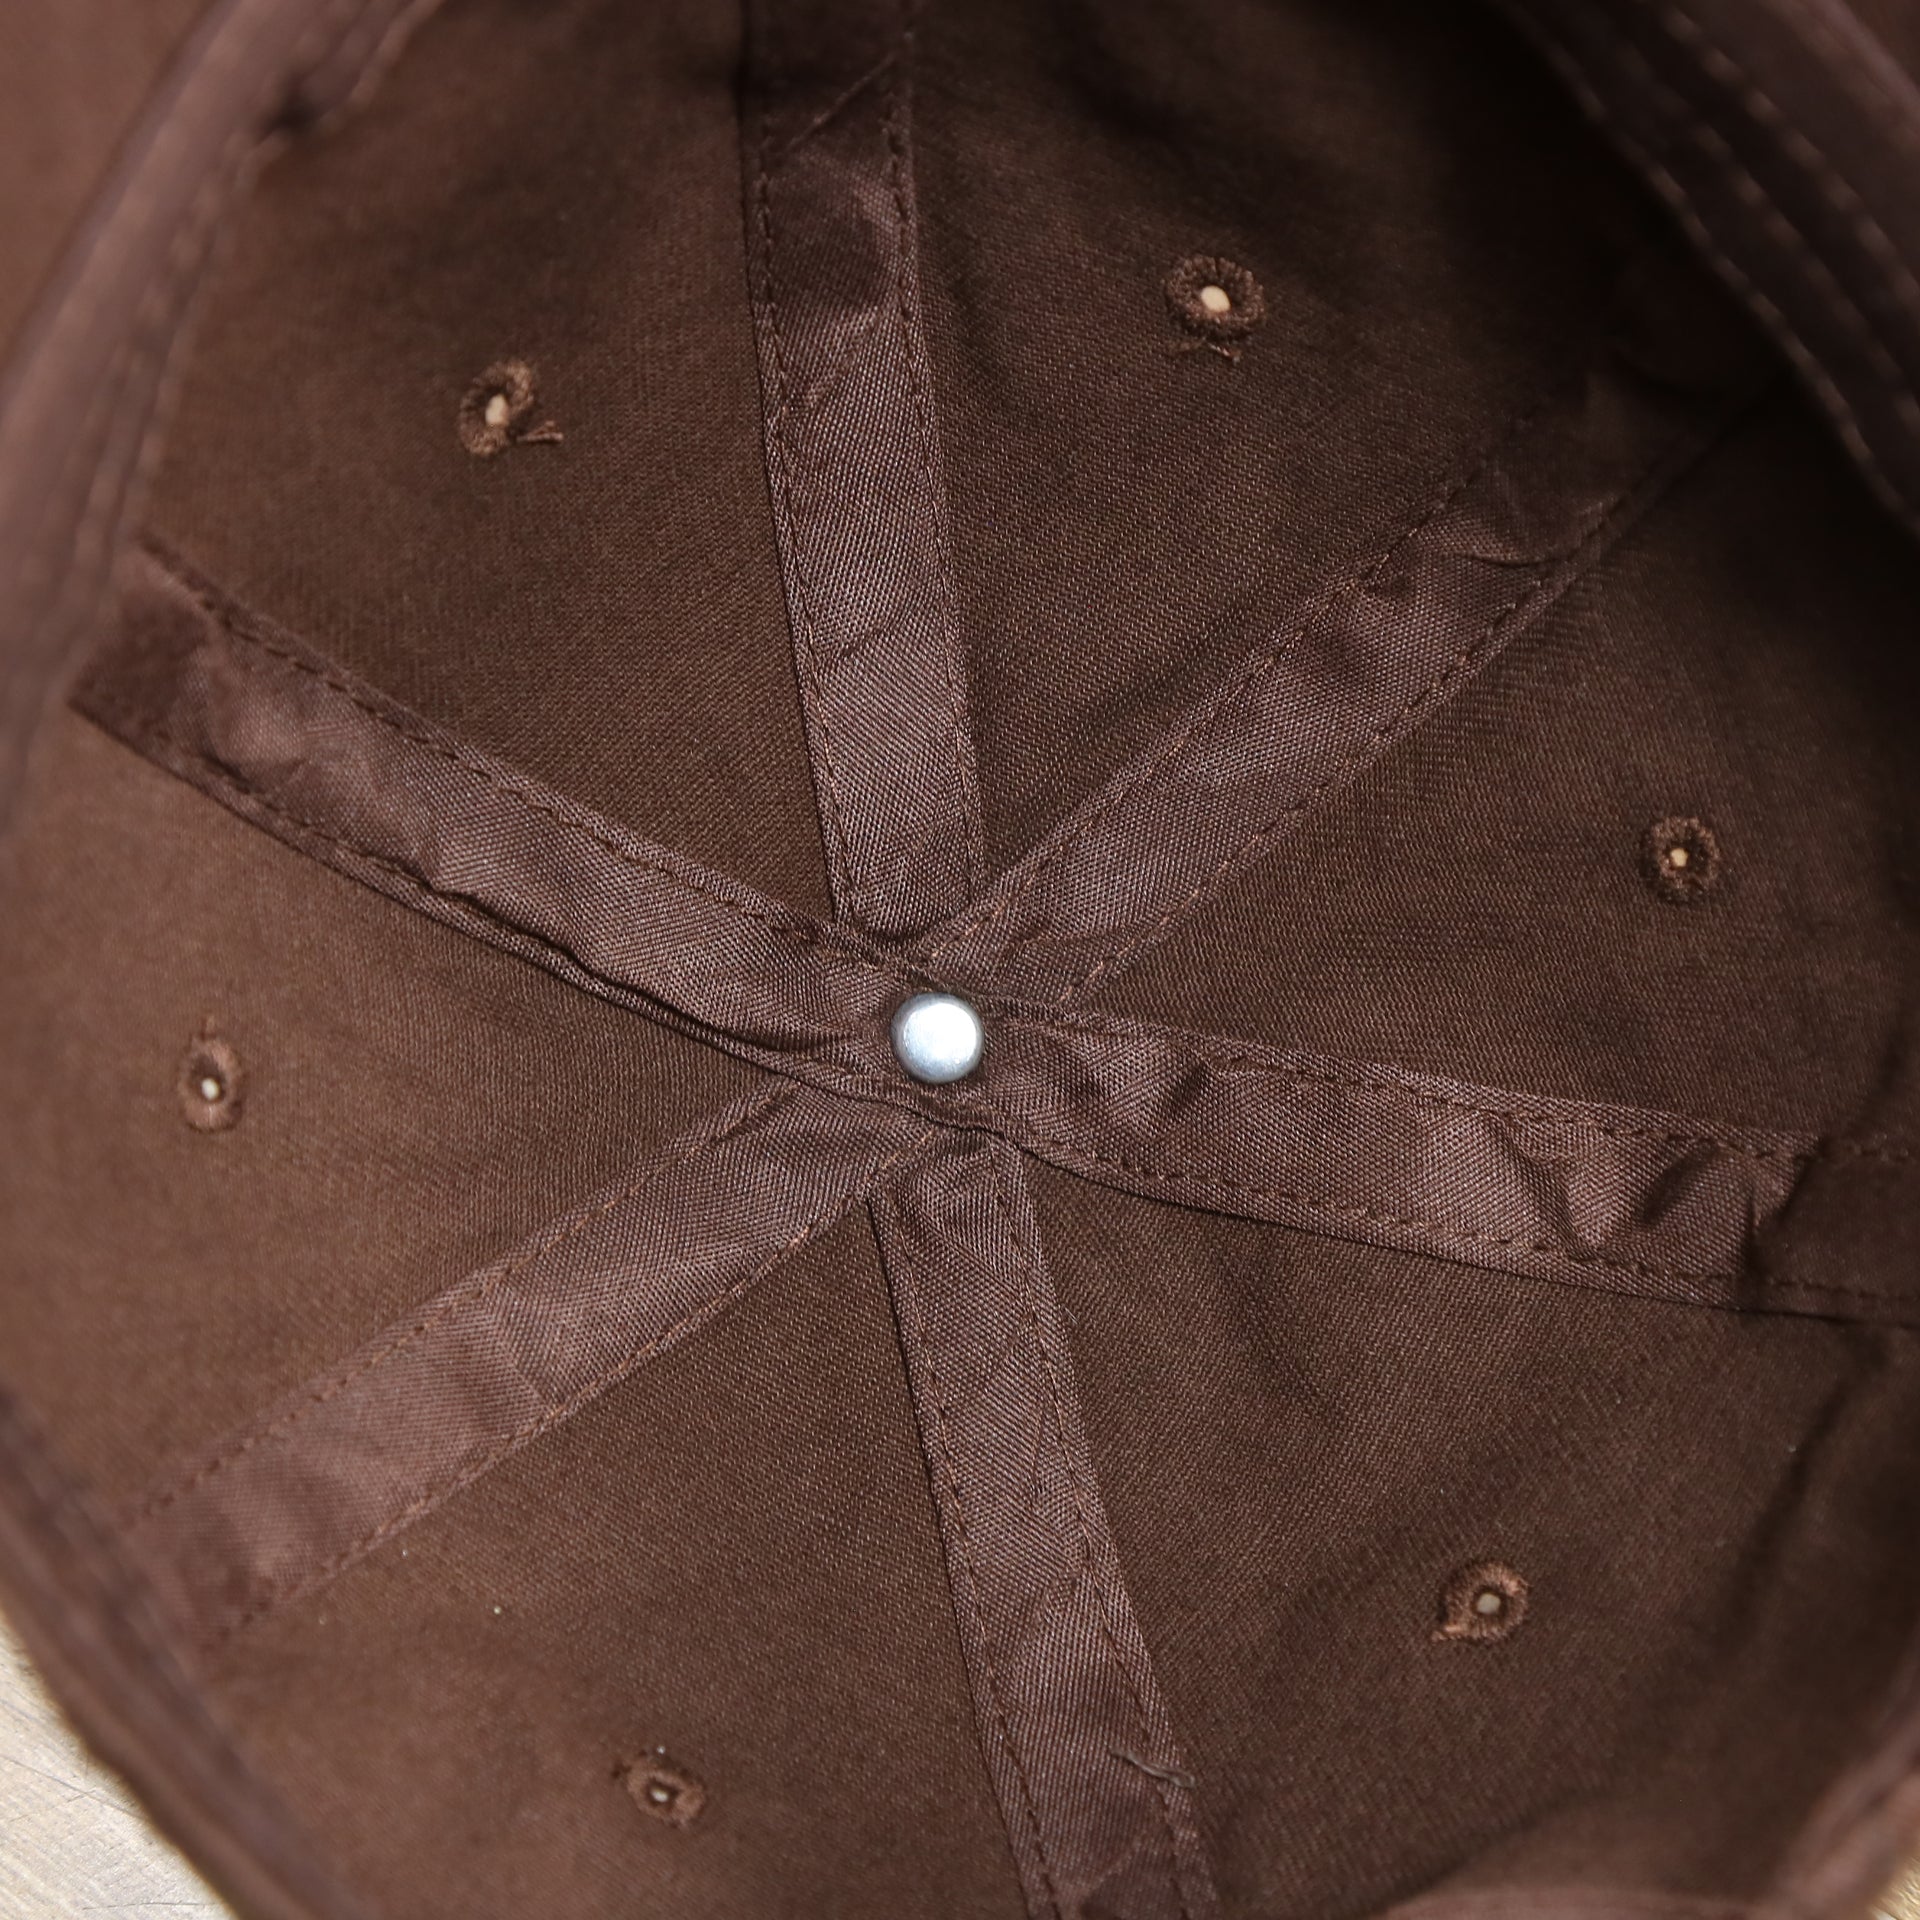 The inside of the Chocolate Bent Brim Blank Baseball Hat | Brown Dad Hat